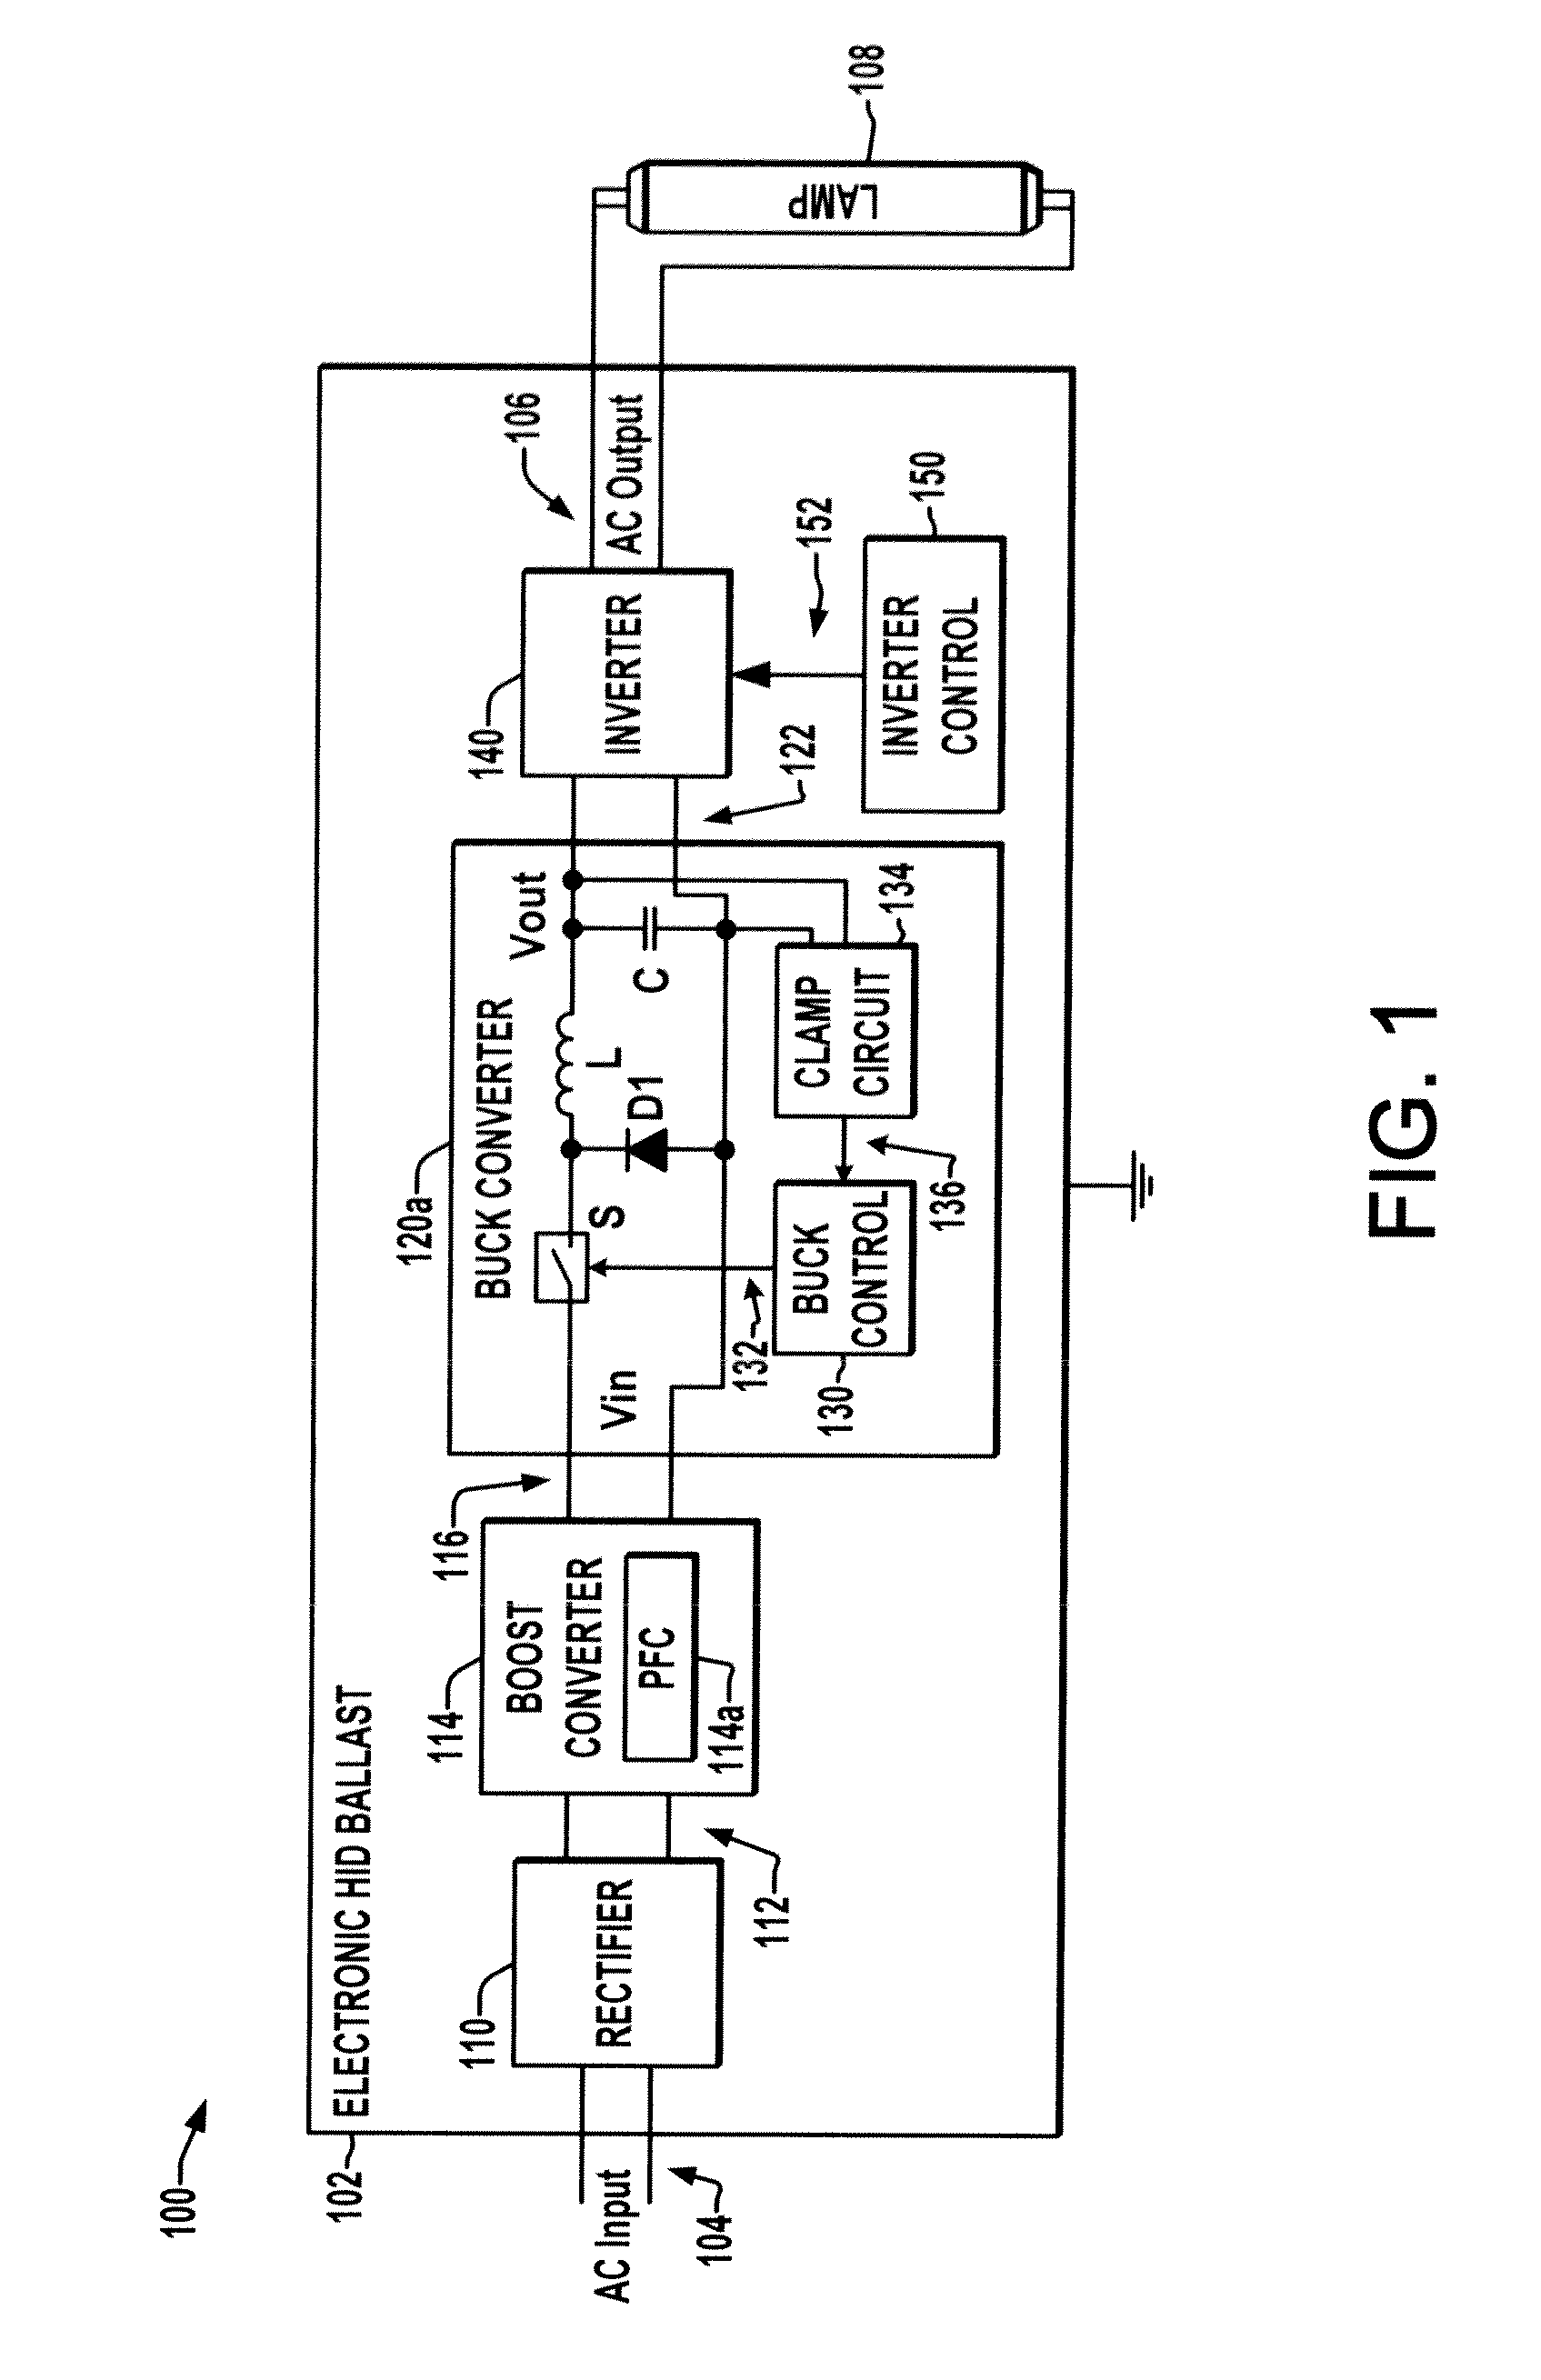 Open circuit voltage clamp for electronic hid ballast